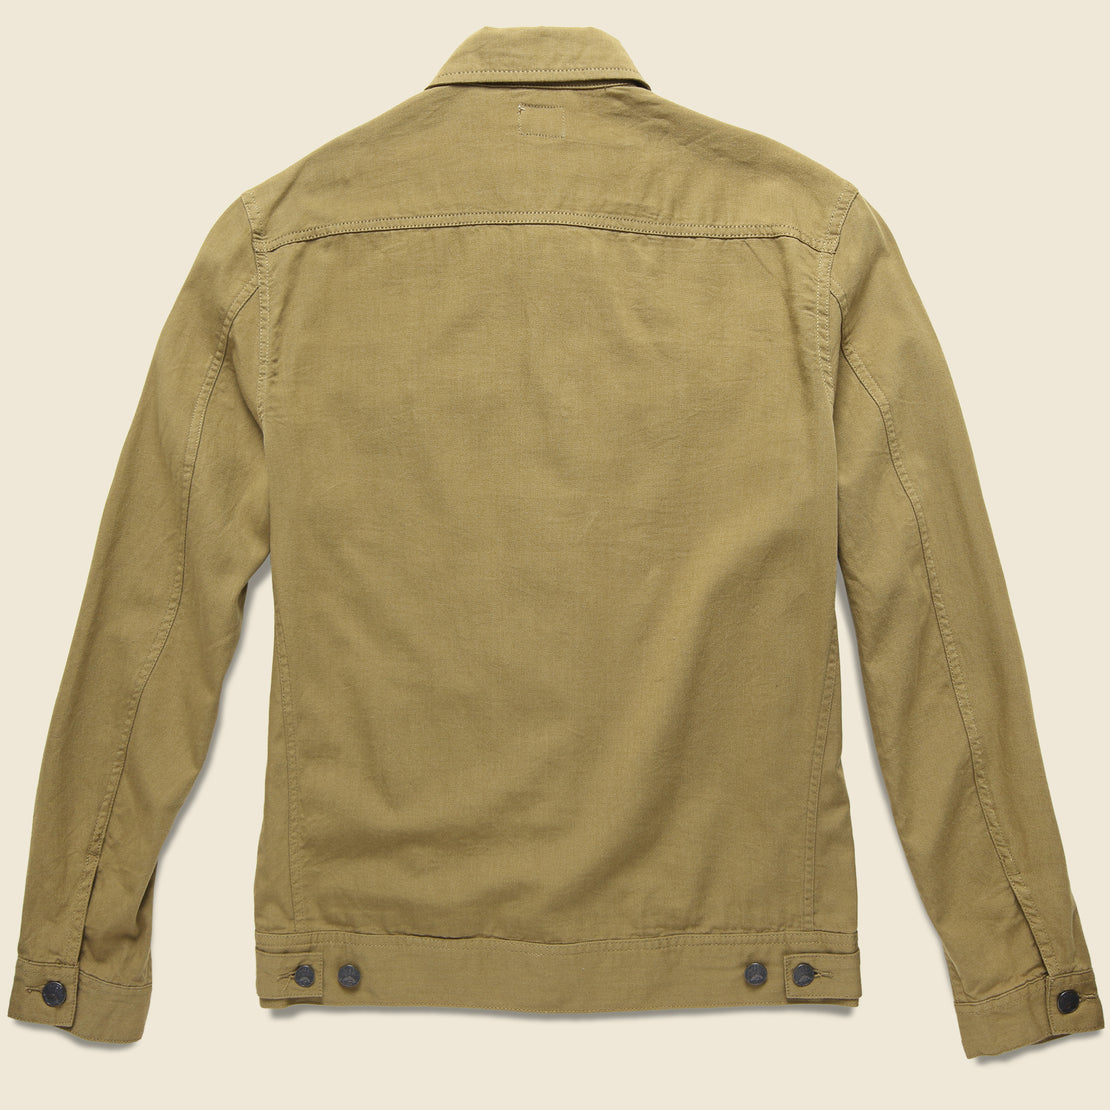 Route 80 Jacket - Weir Brown